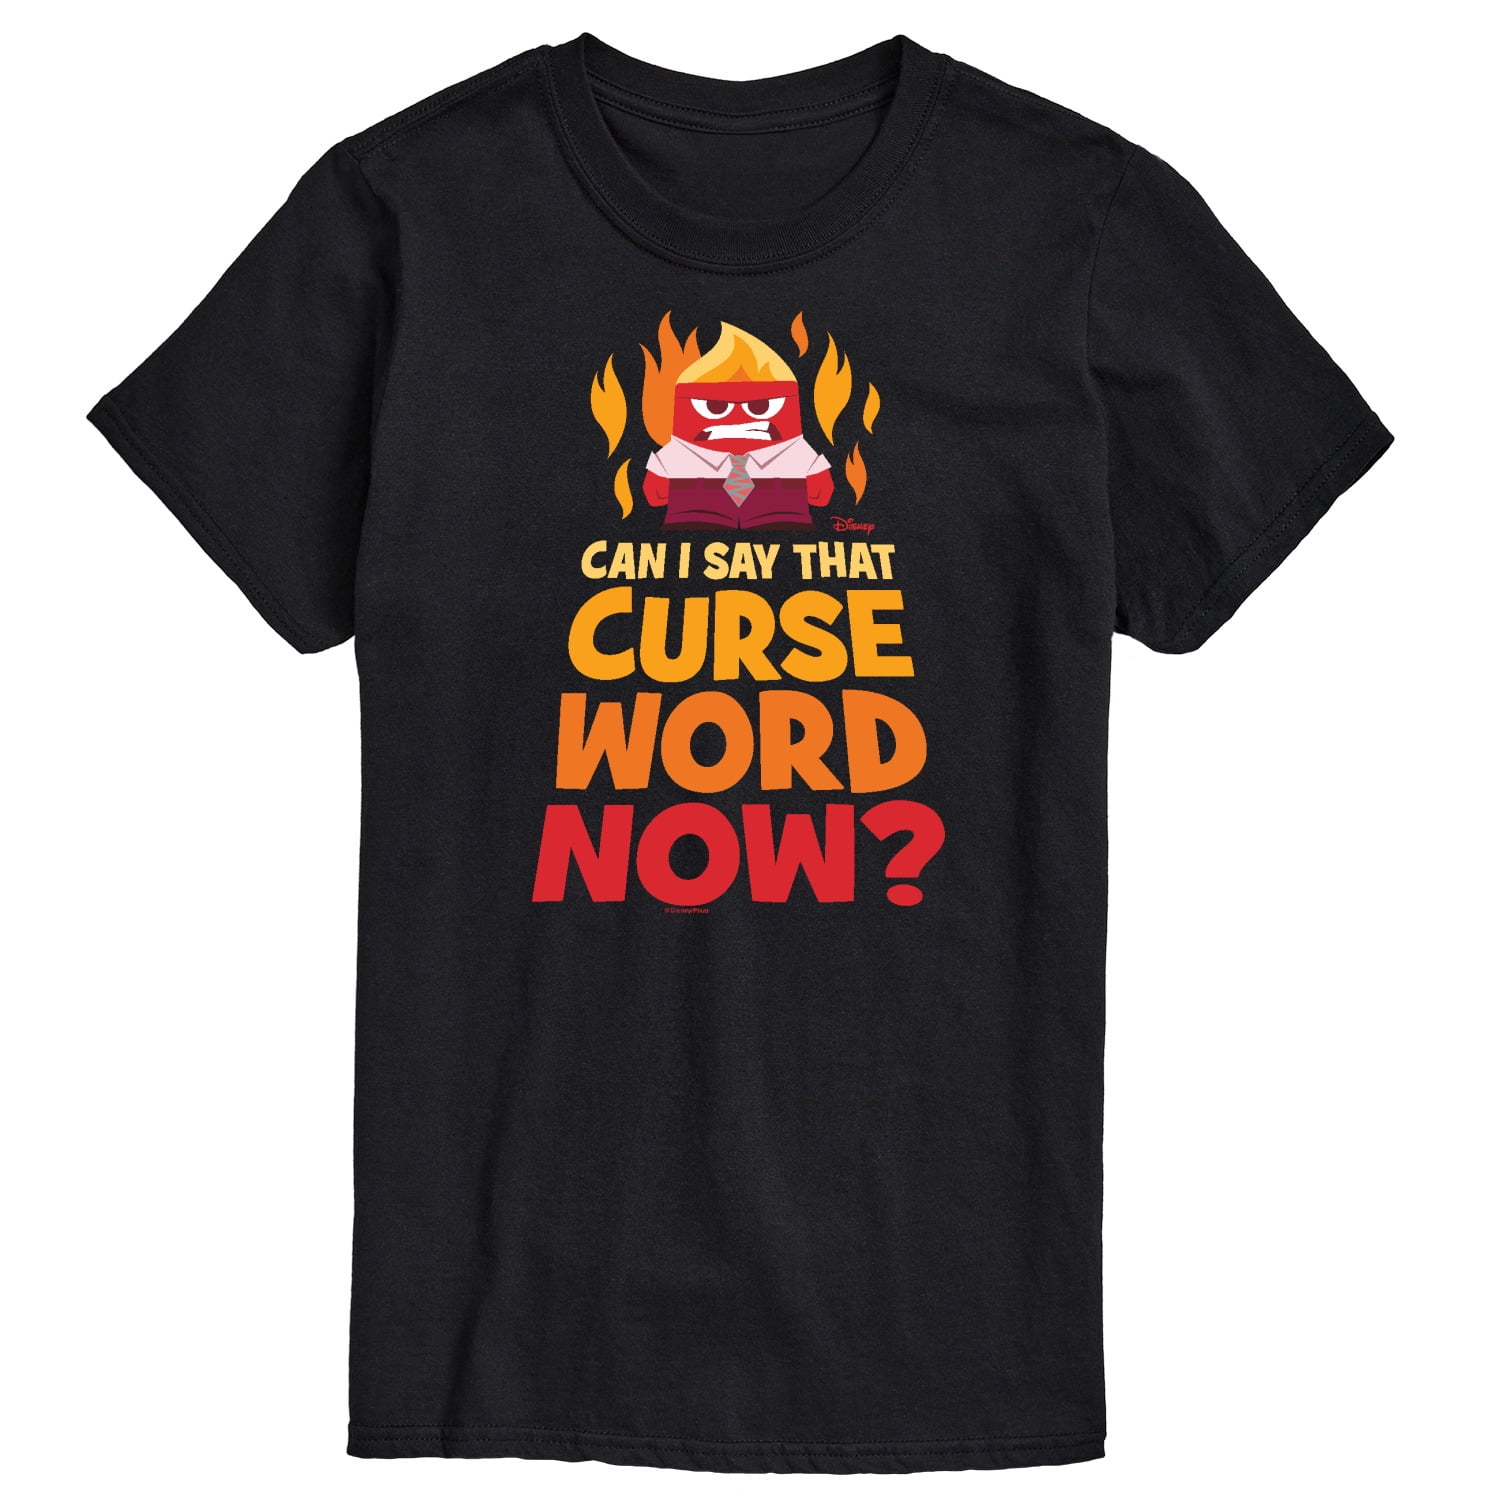 Inside Out - Can I Say That Curse Word - Men's Short Sleeve Graphic T-Shirt